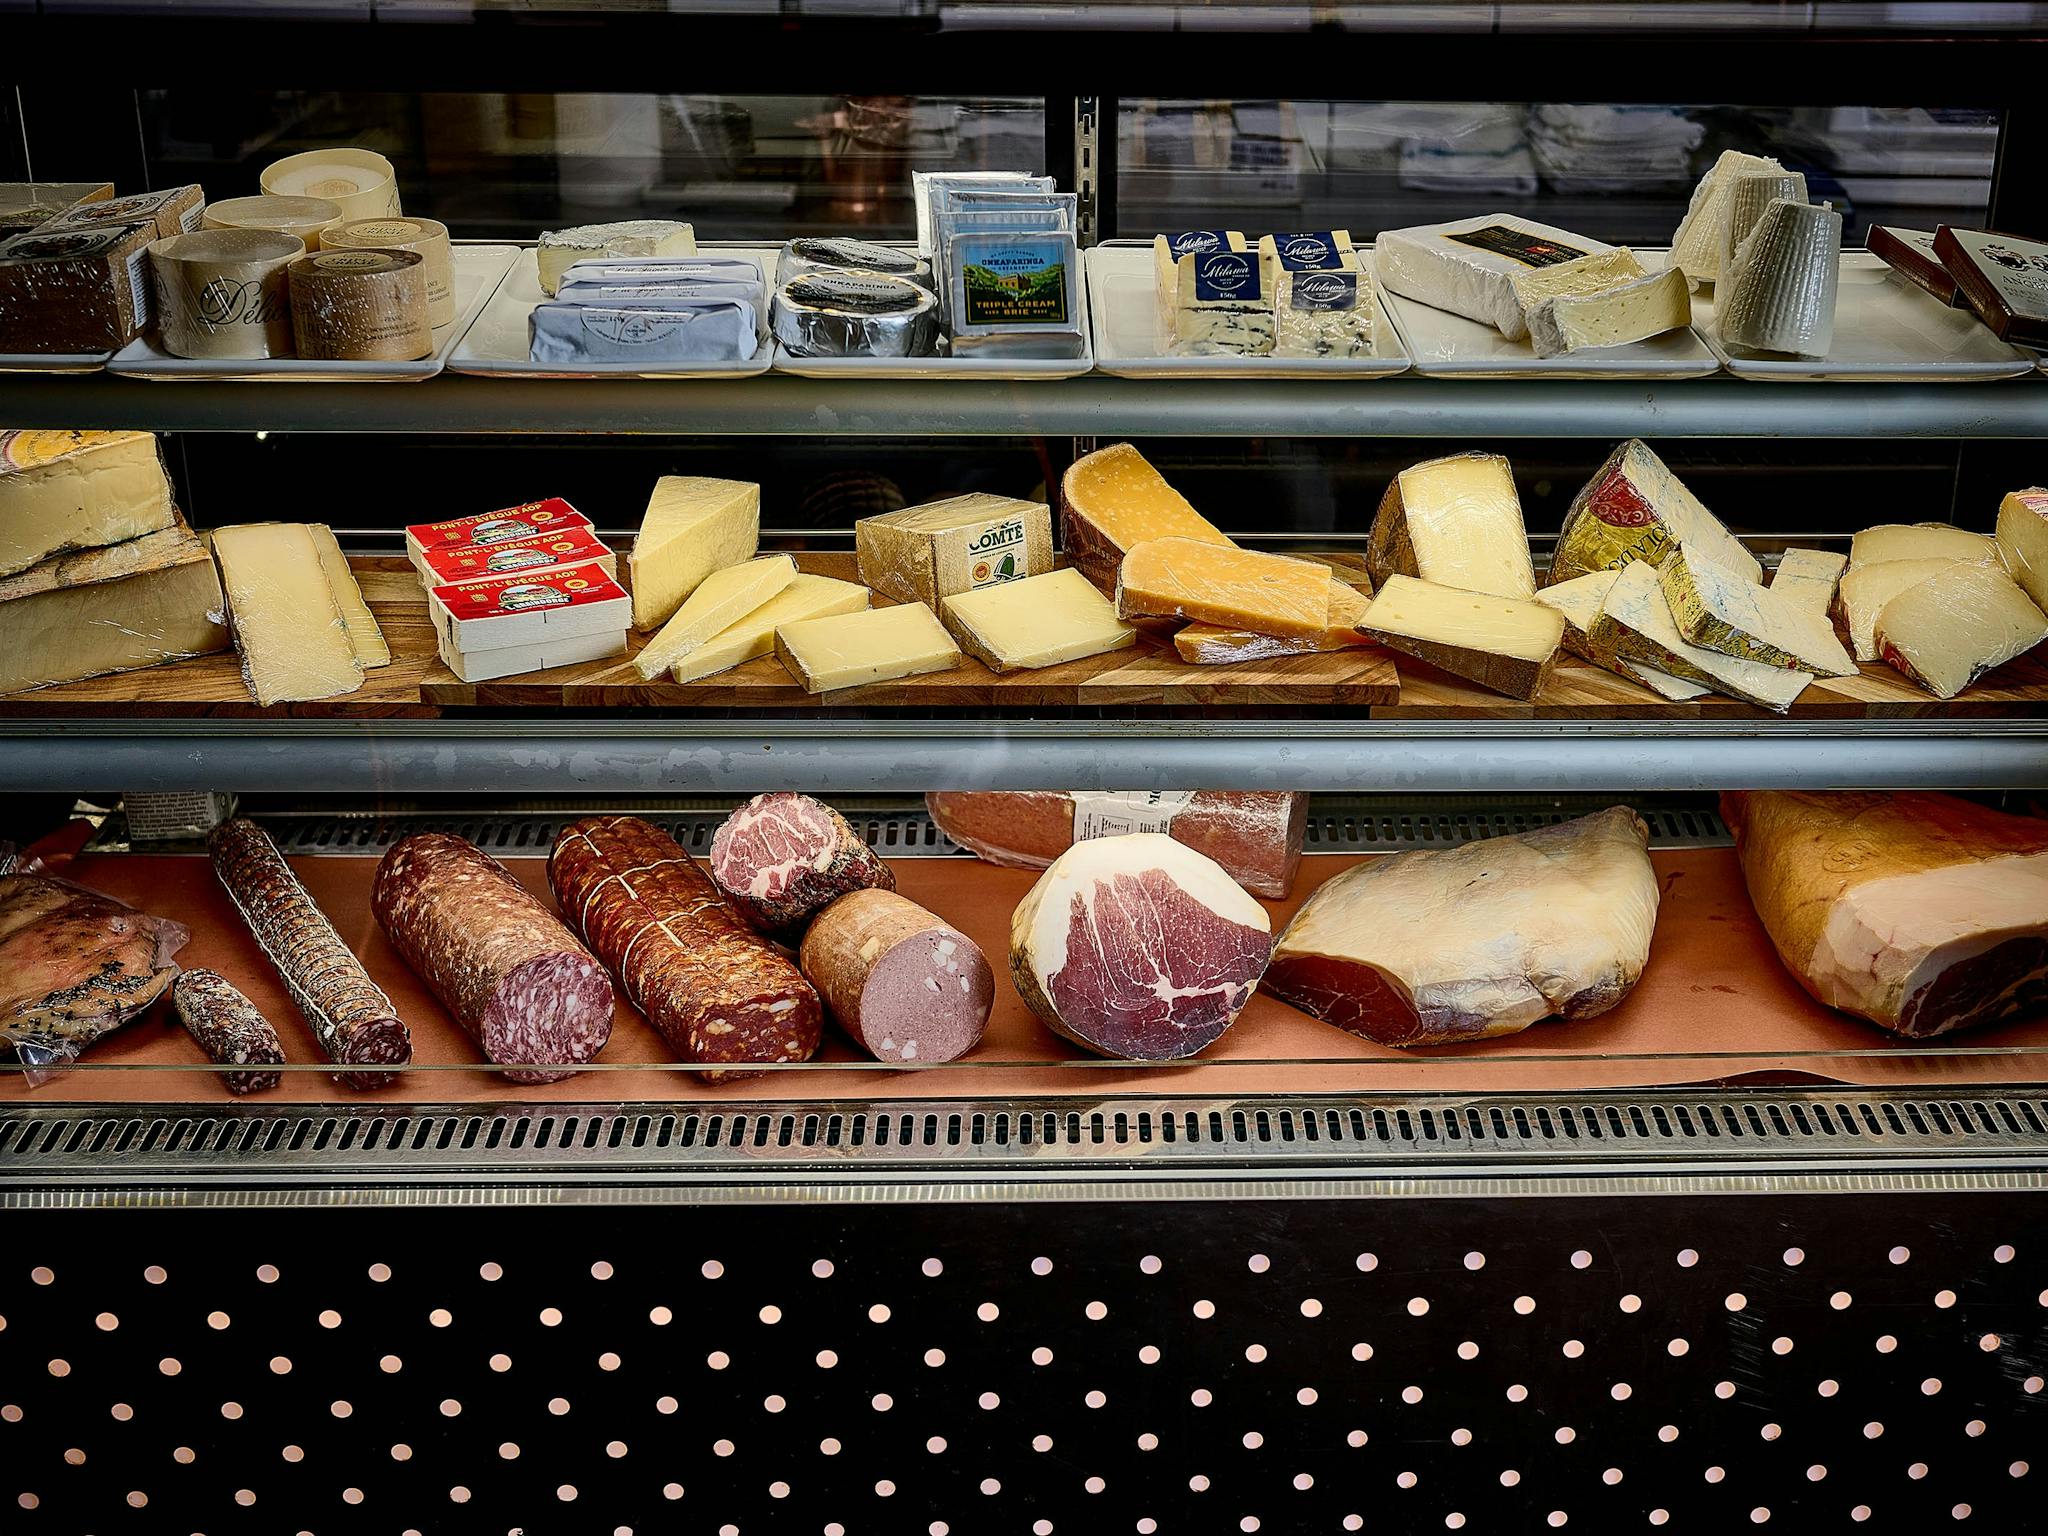 Deli display of cheeses and cured meats